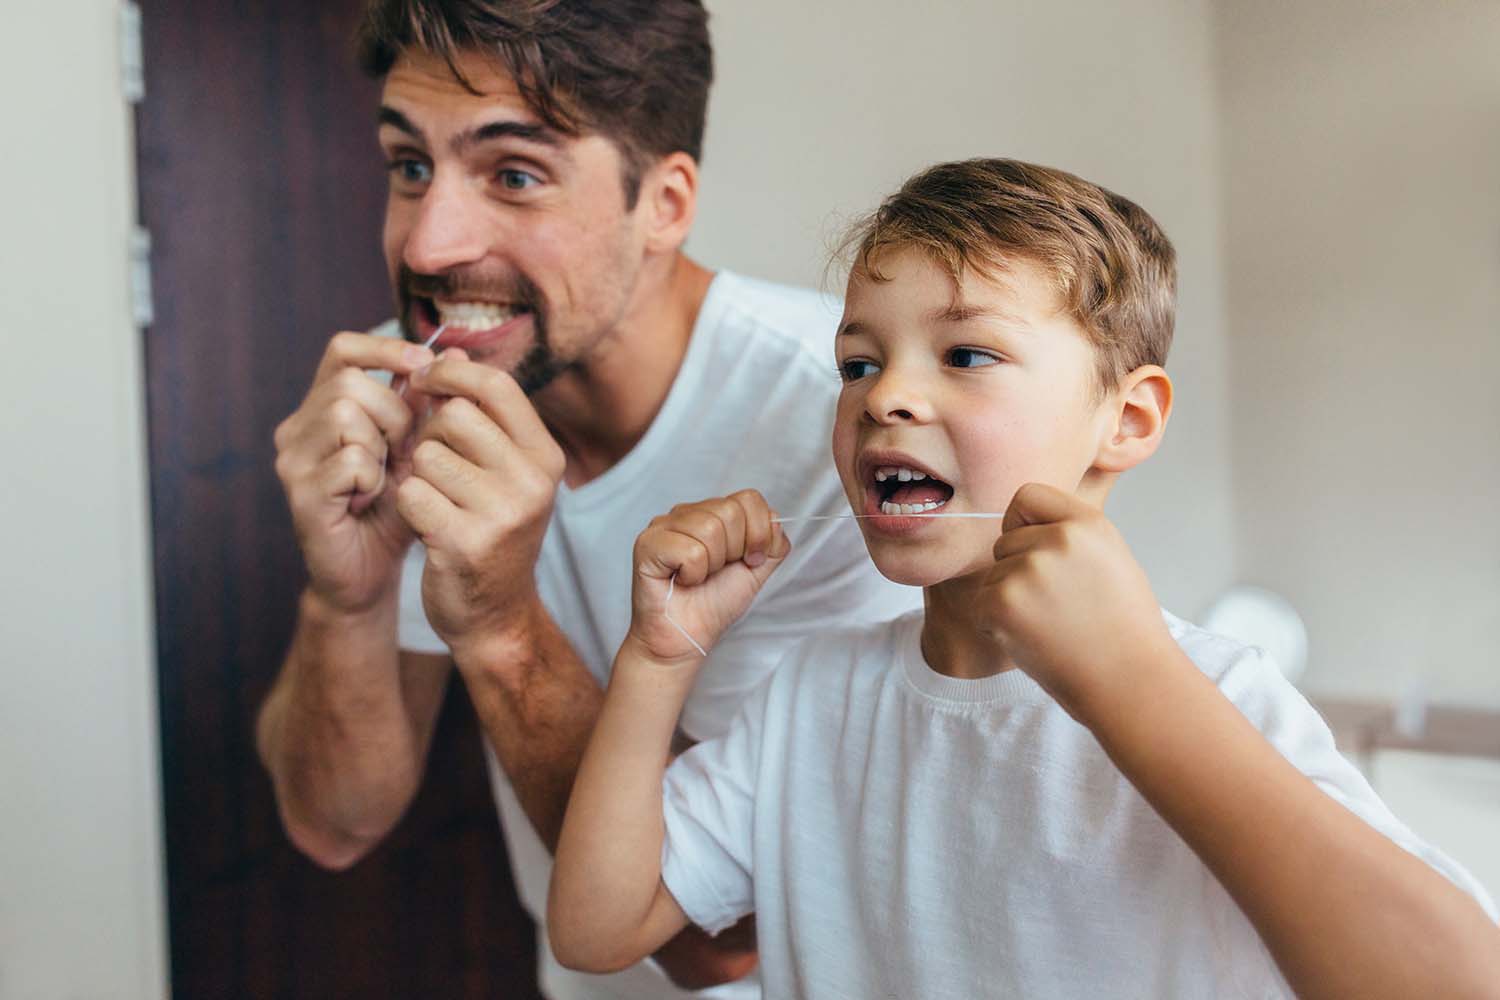 A father and son, patients at West Richland Family dental, floss together during their daily home oral care routine.